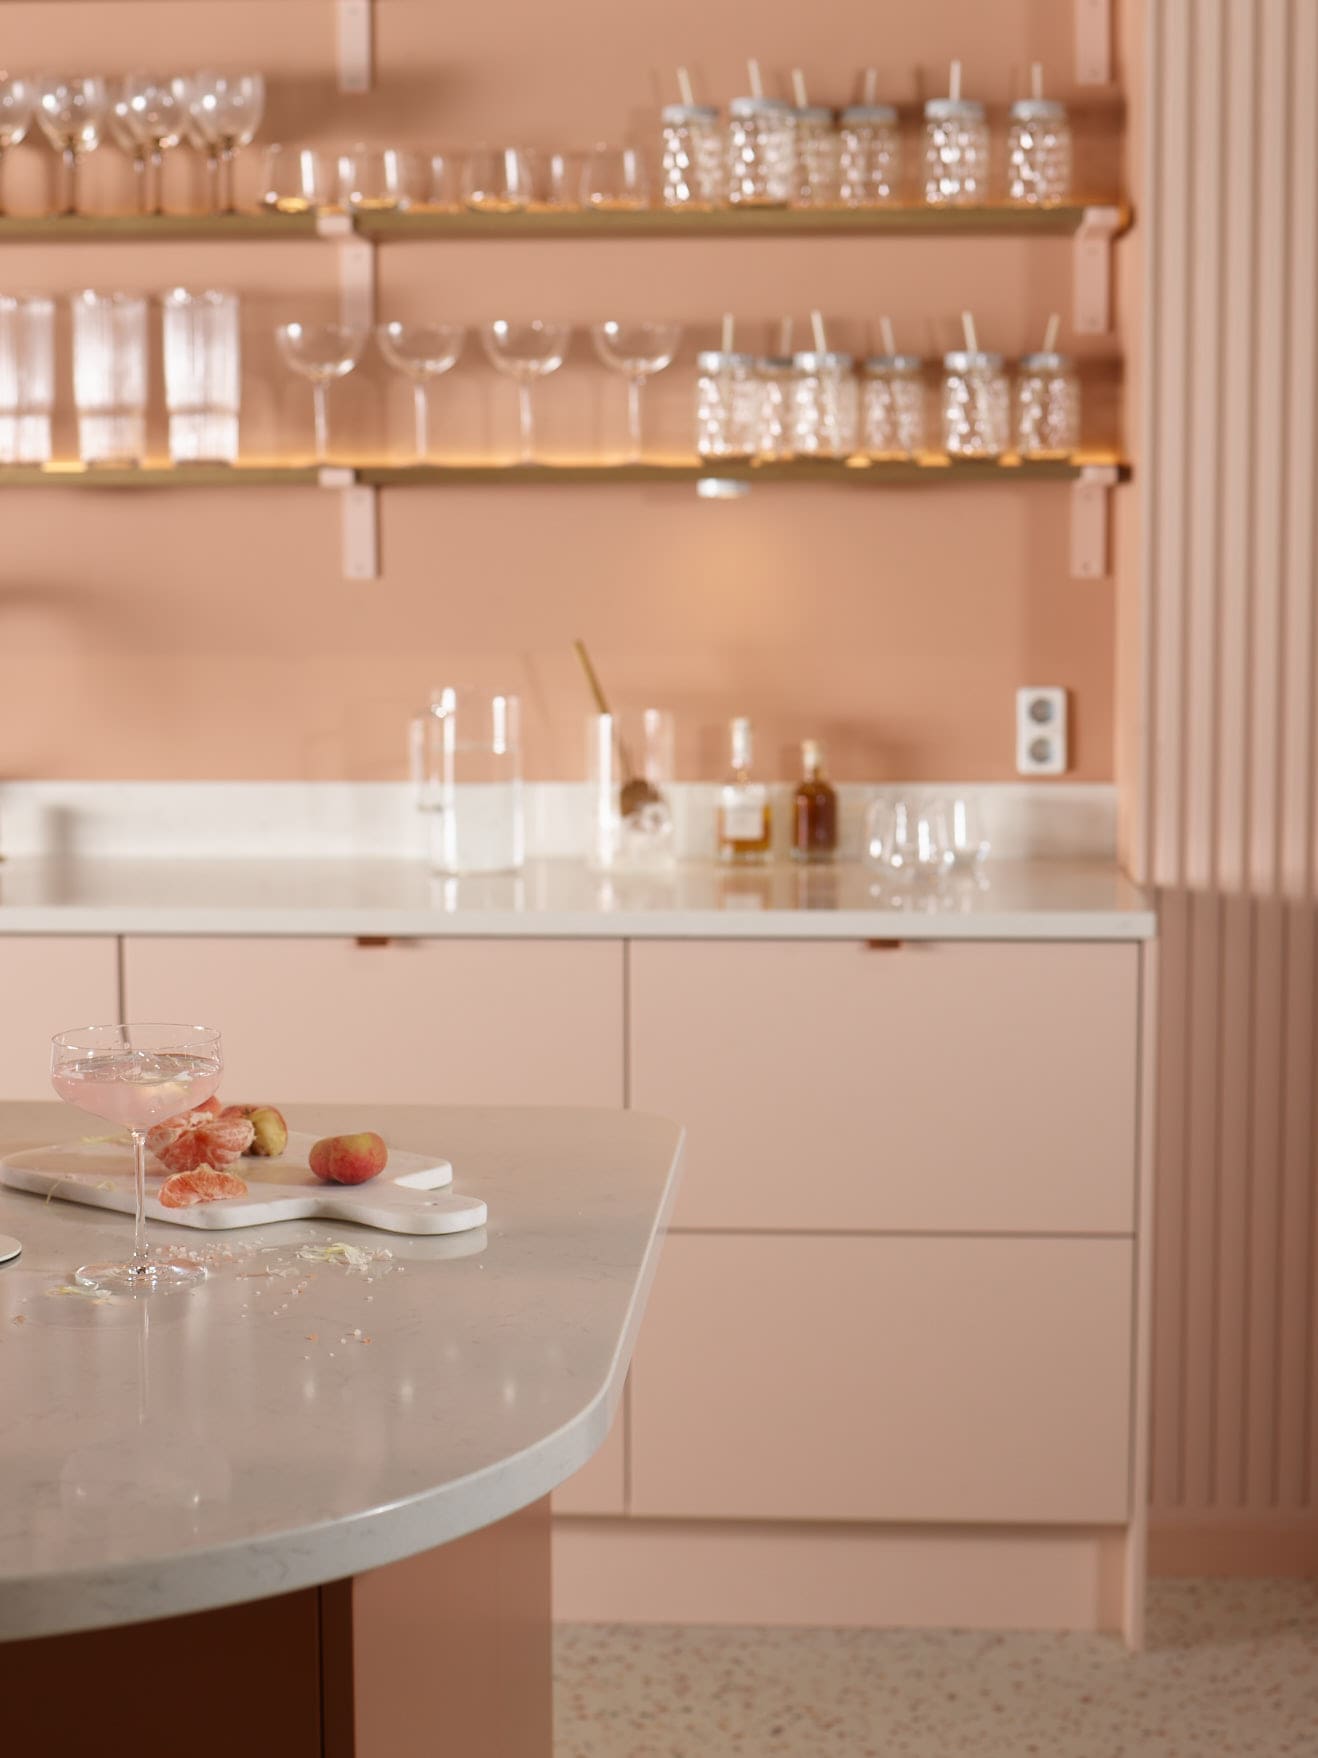 Trend blush colored kitchen and glasses on a shelf